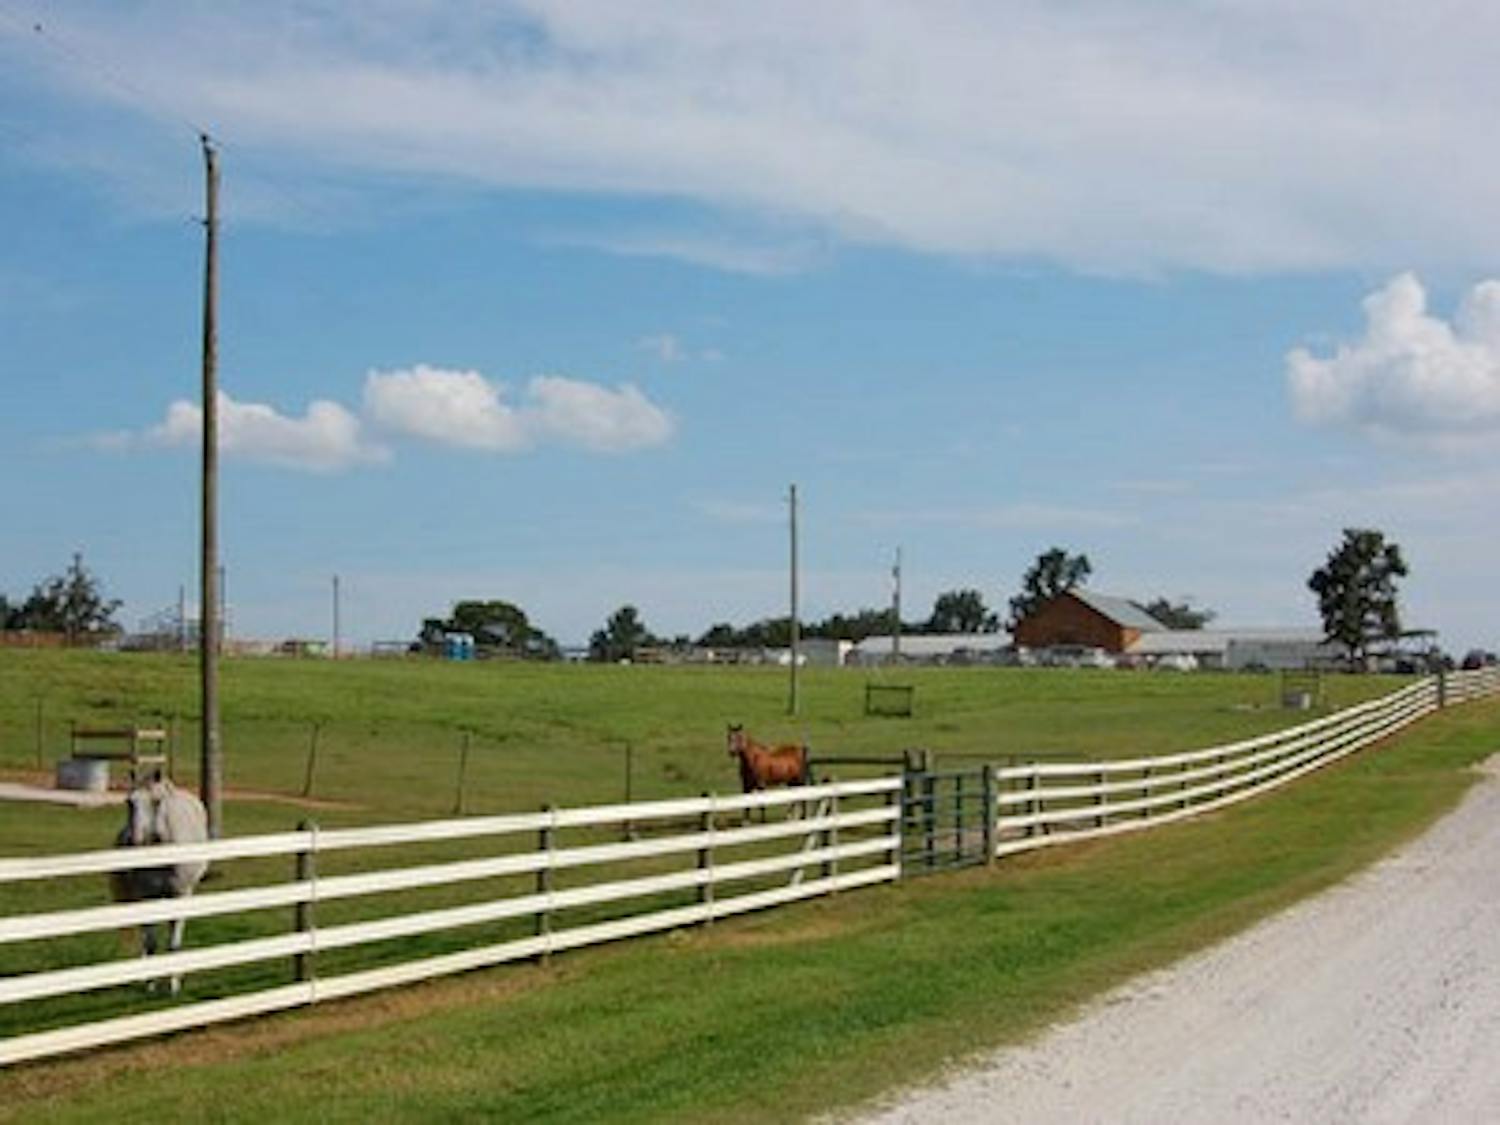 The Auburn University Equestrian Team practices five days a week at the Horse Center on Wire Road.